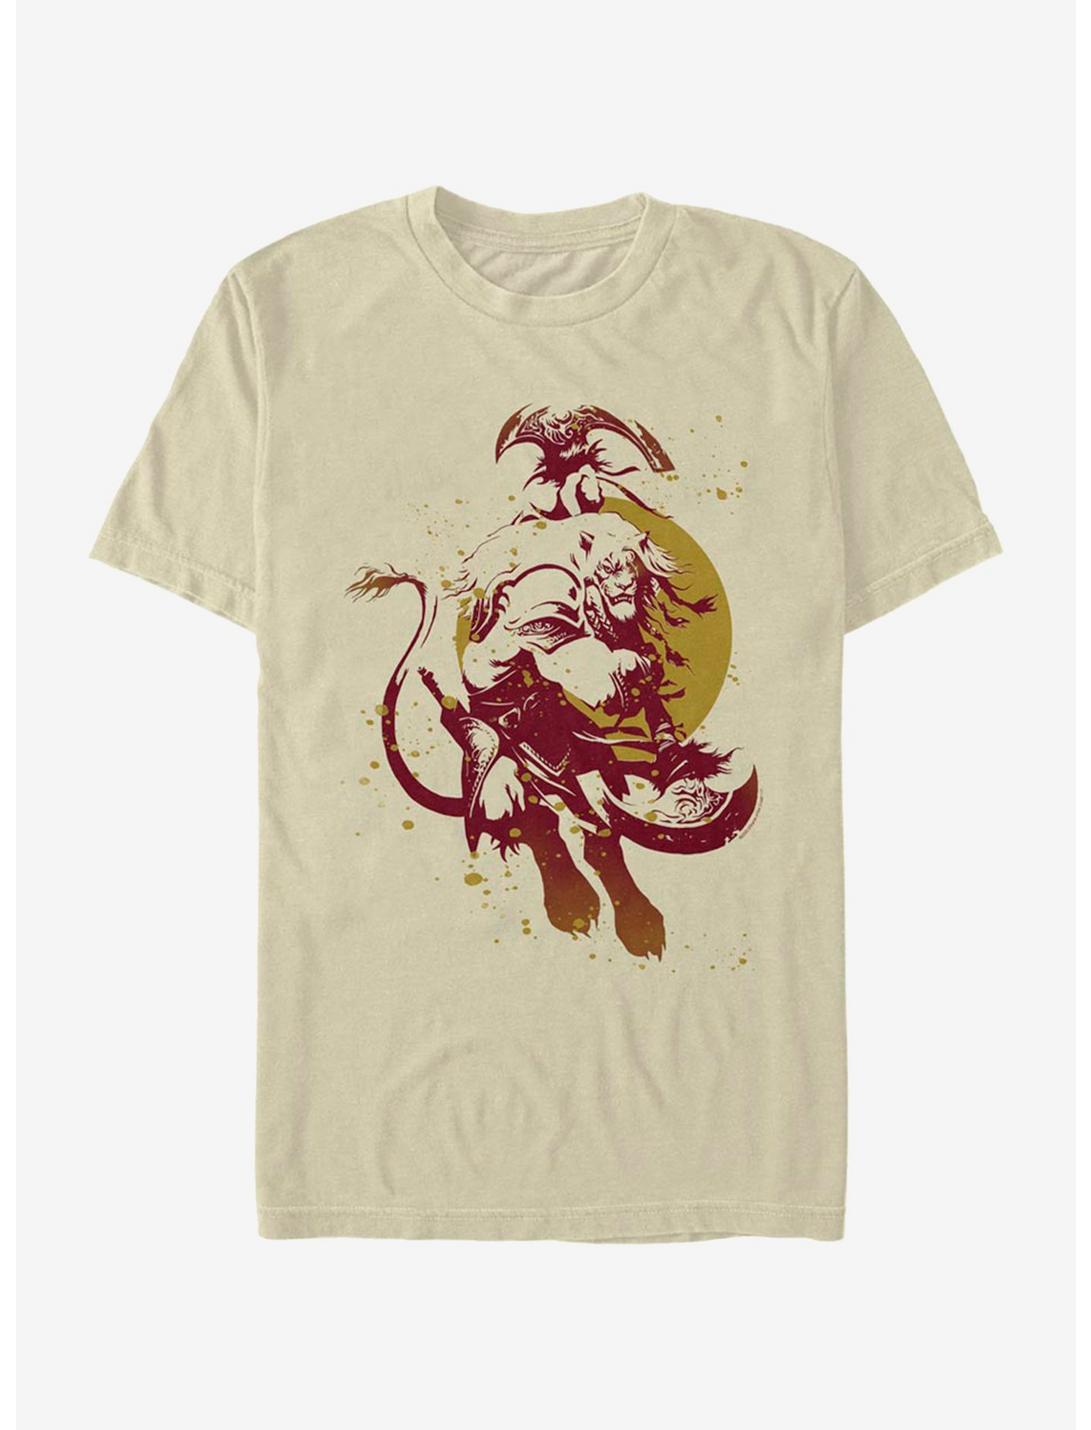 Magic: The Gathering Ajani in Action T-Shirt, SAND, hi-res